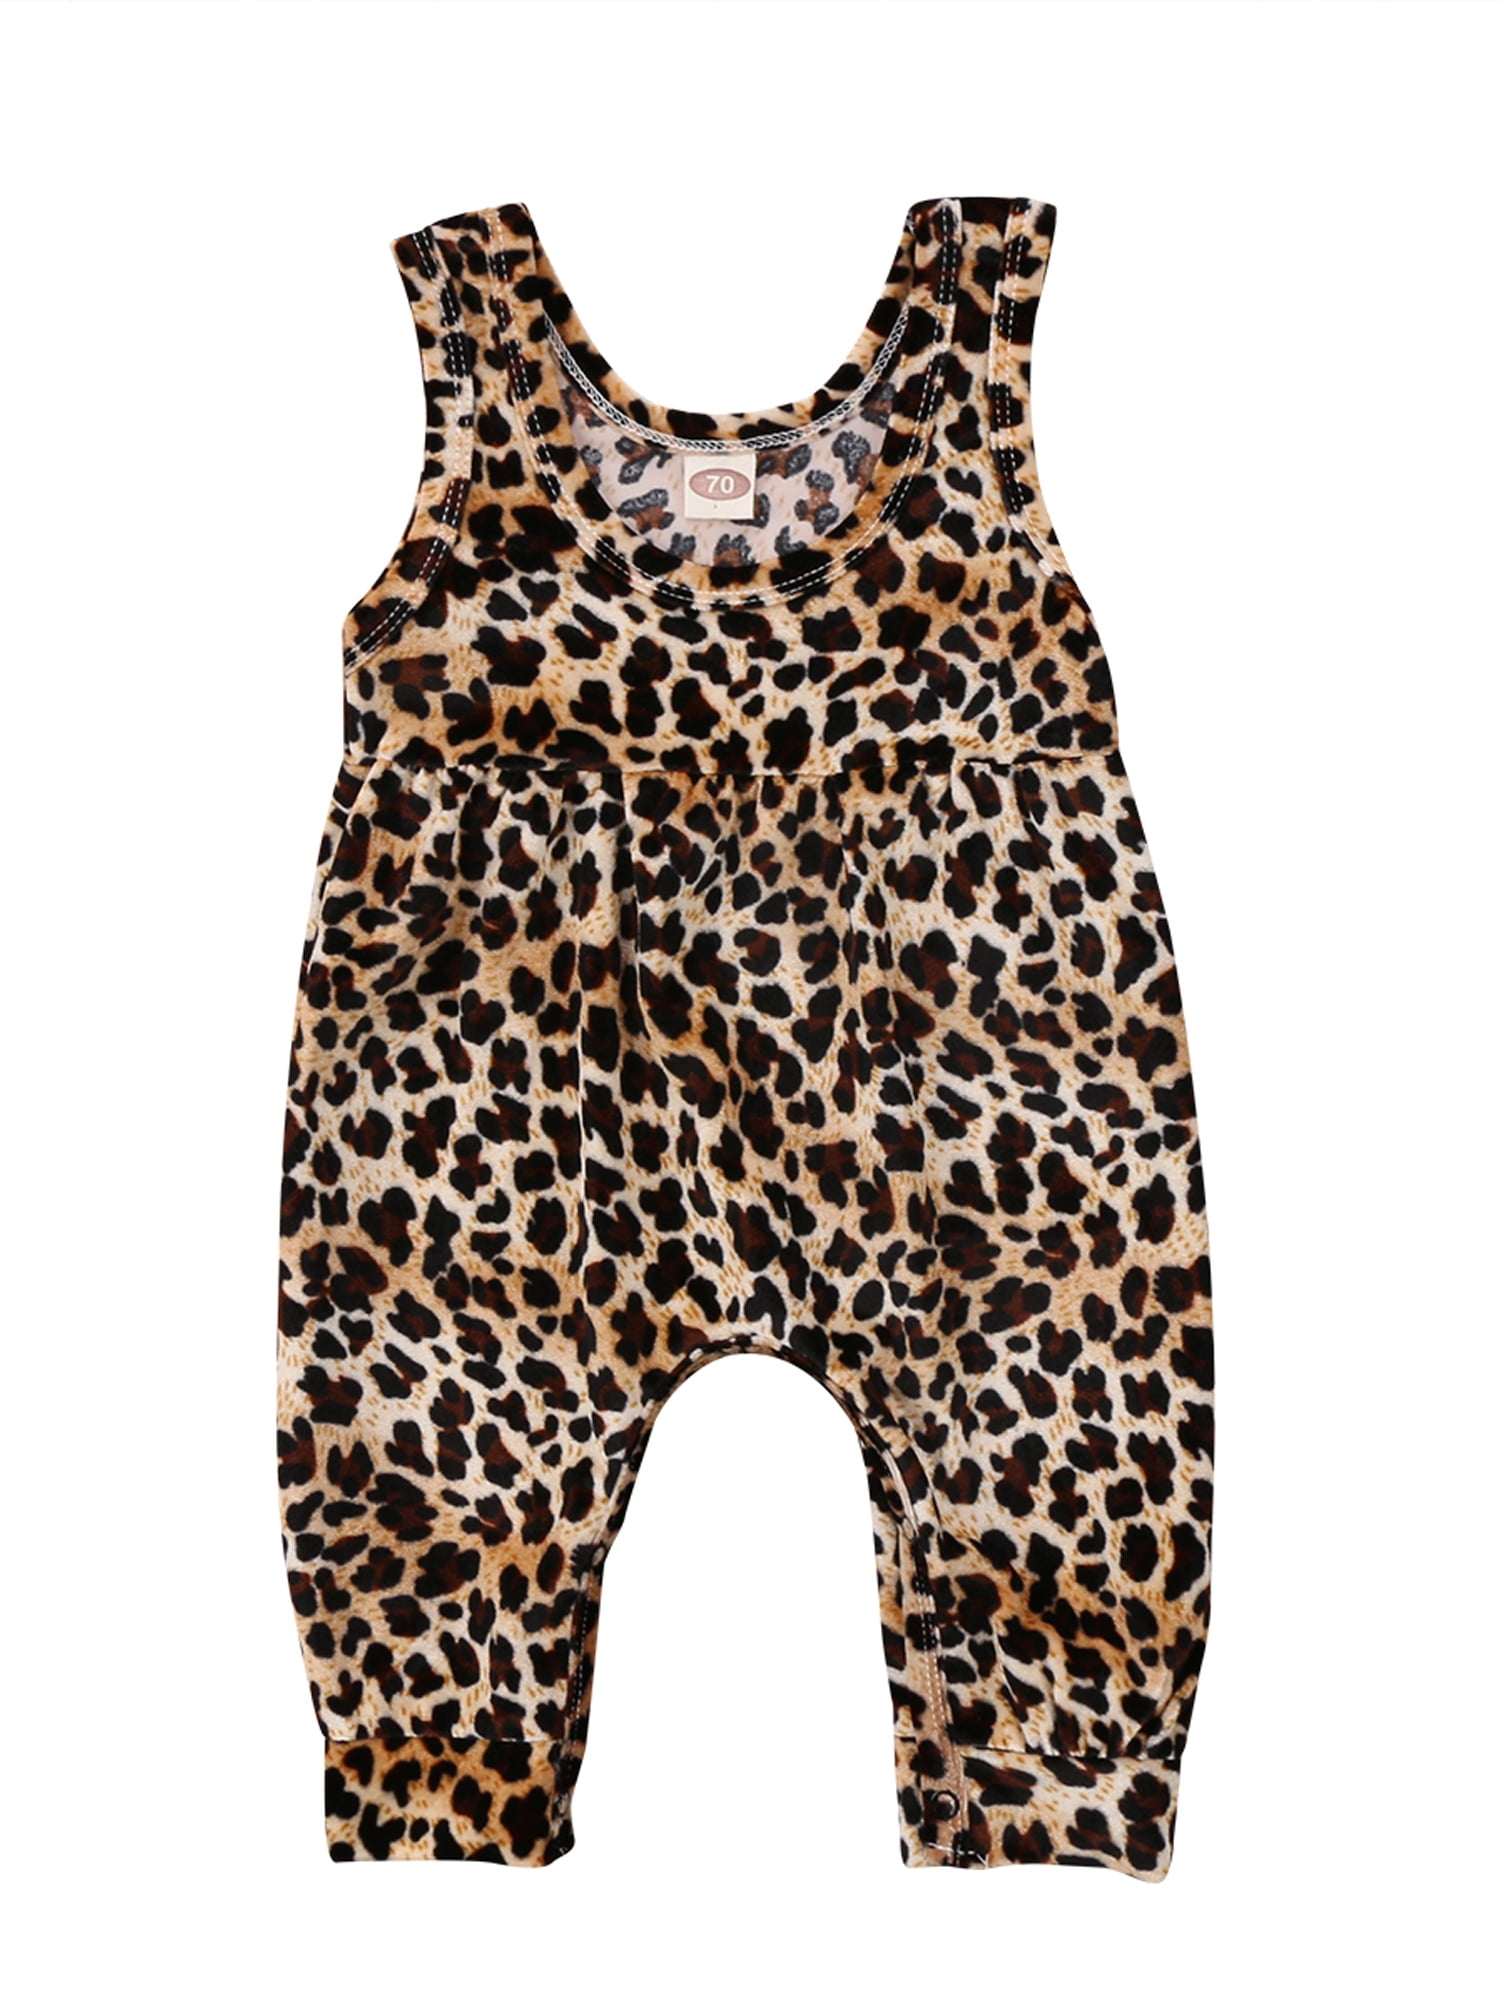 Toddler Baby Girls Kids Boys Leopard Printed Sleeveless Romper Jumpsuit Clothes 